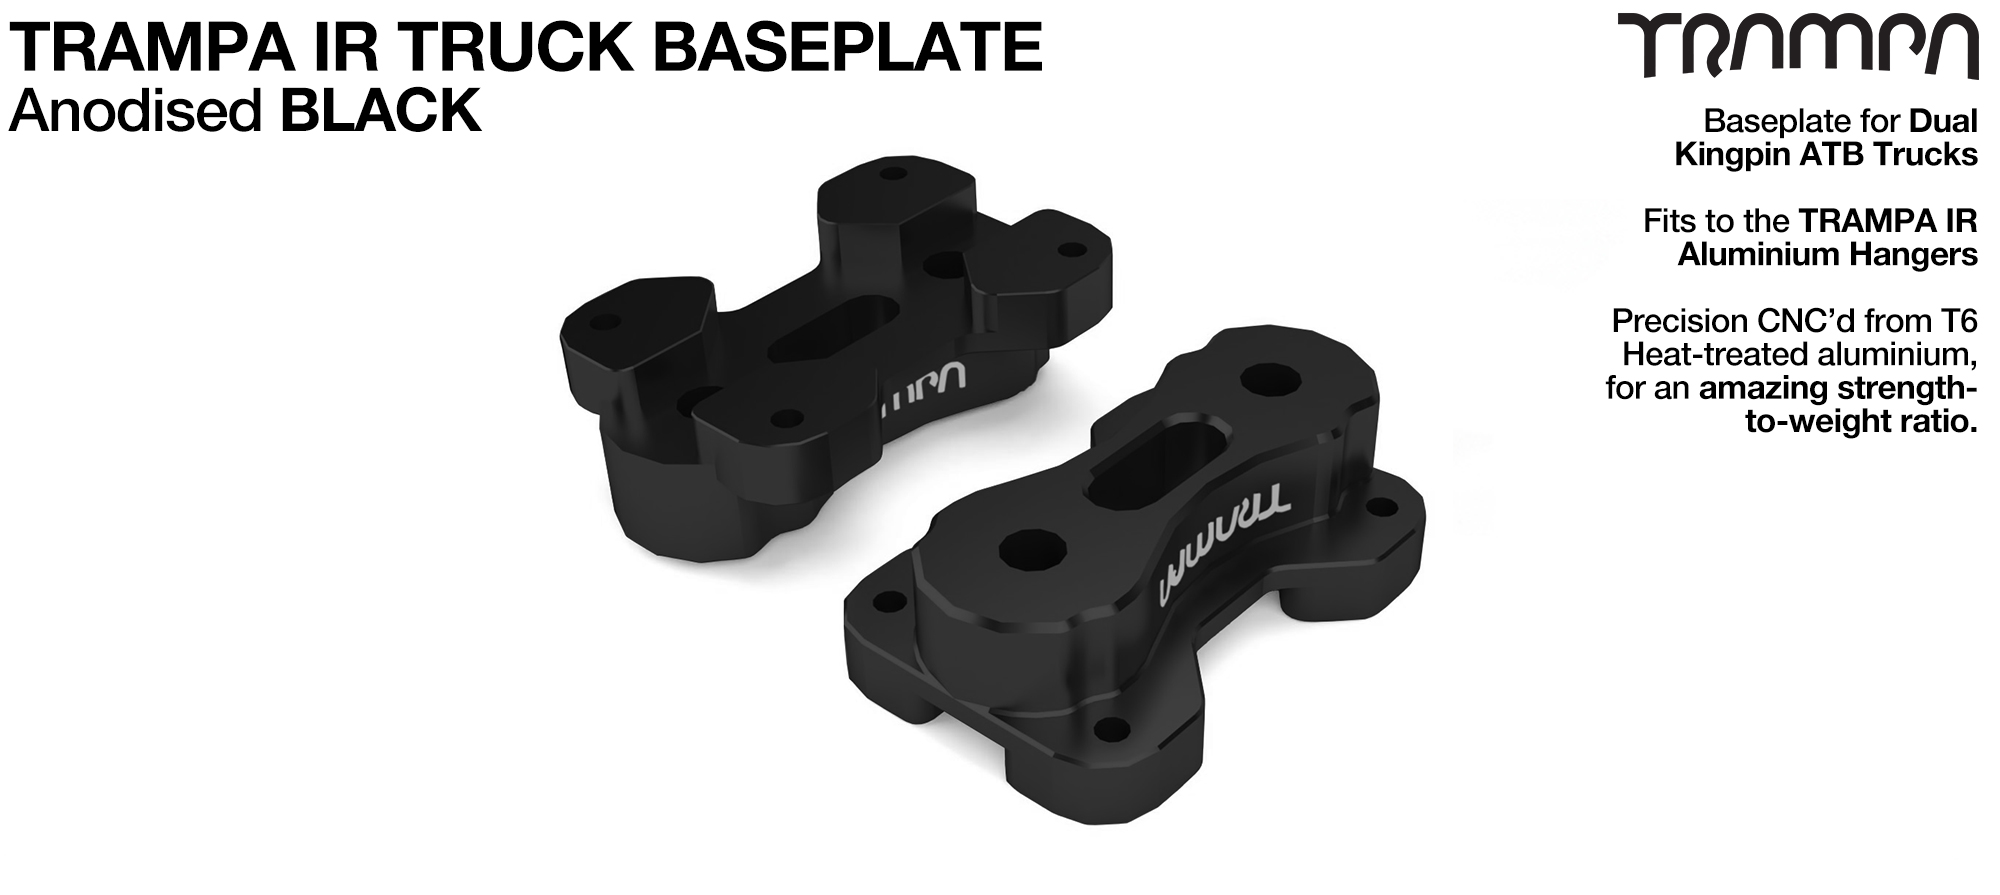 TRAMPA IR BASEPLATE - CNC Precision made TRAMPA IR Trucks are super light & Packed with performance - BLACK